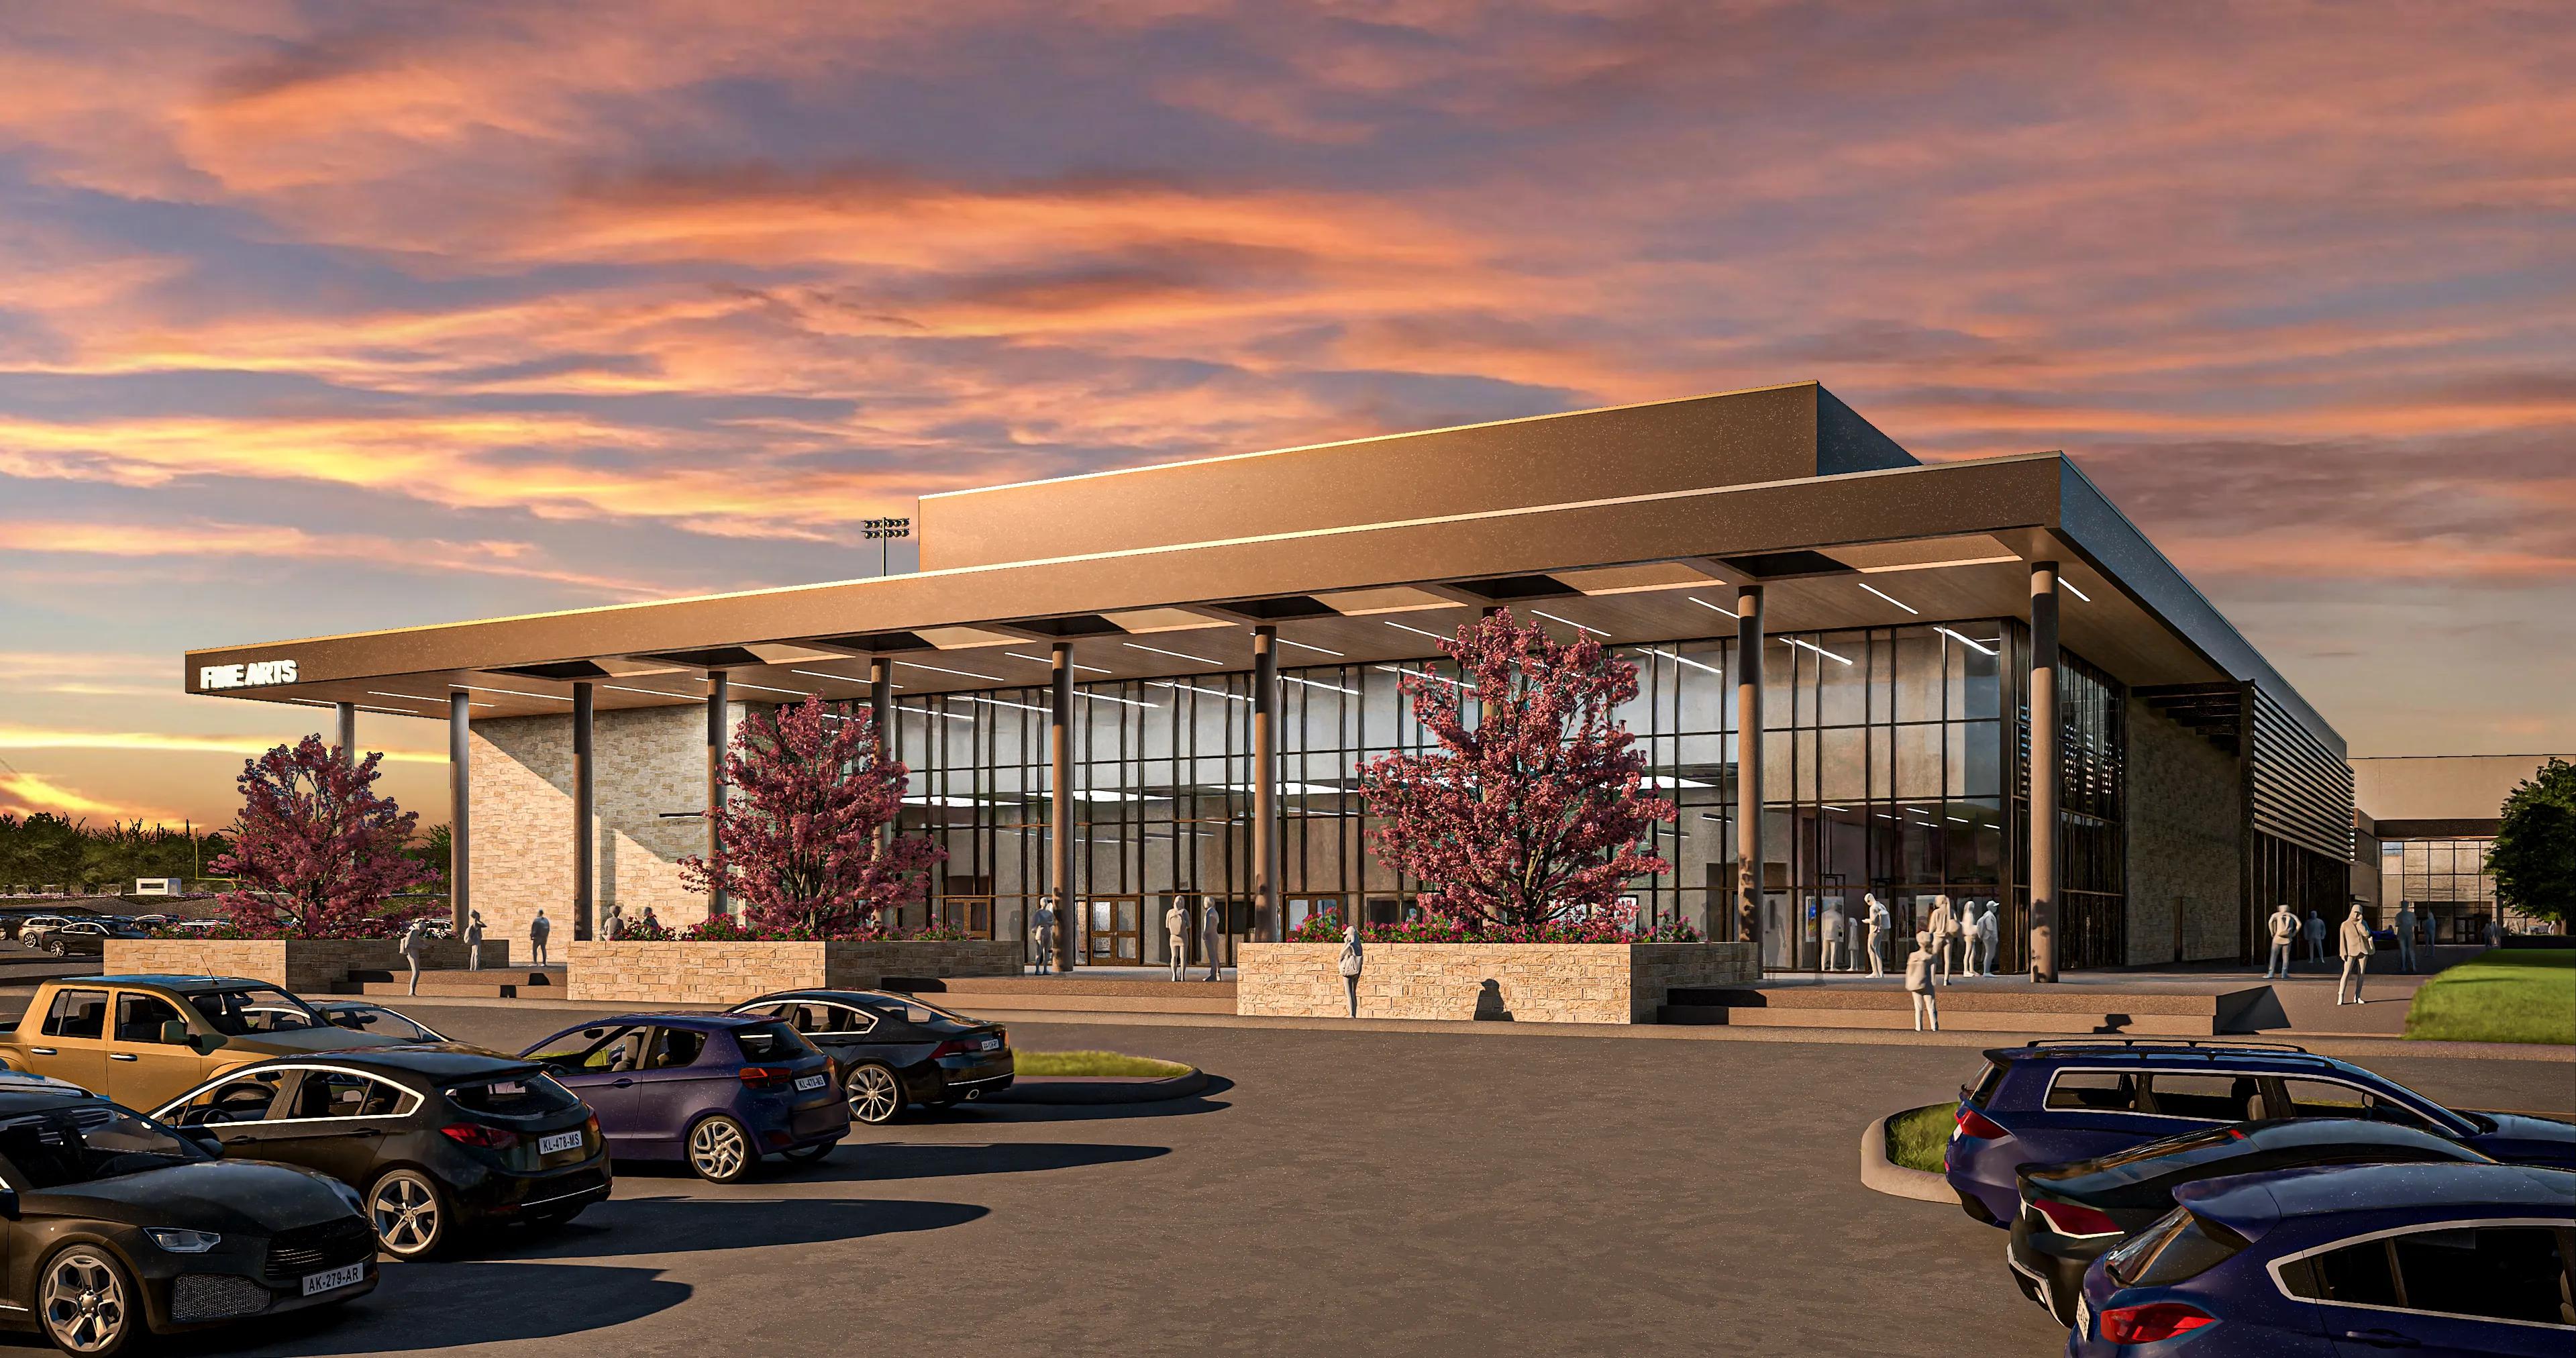 Rendering of entrance to Legacy Ranch High School with parking lot.